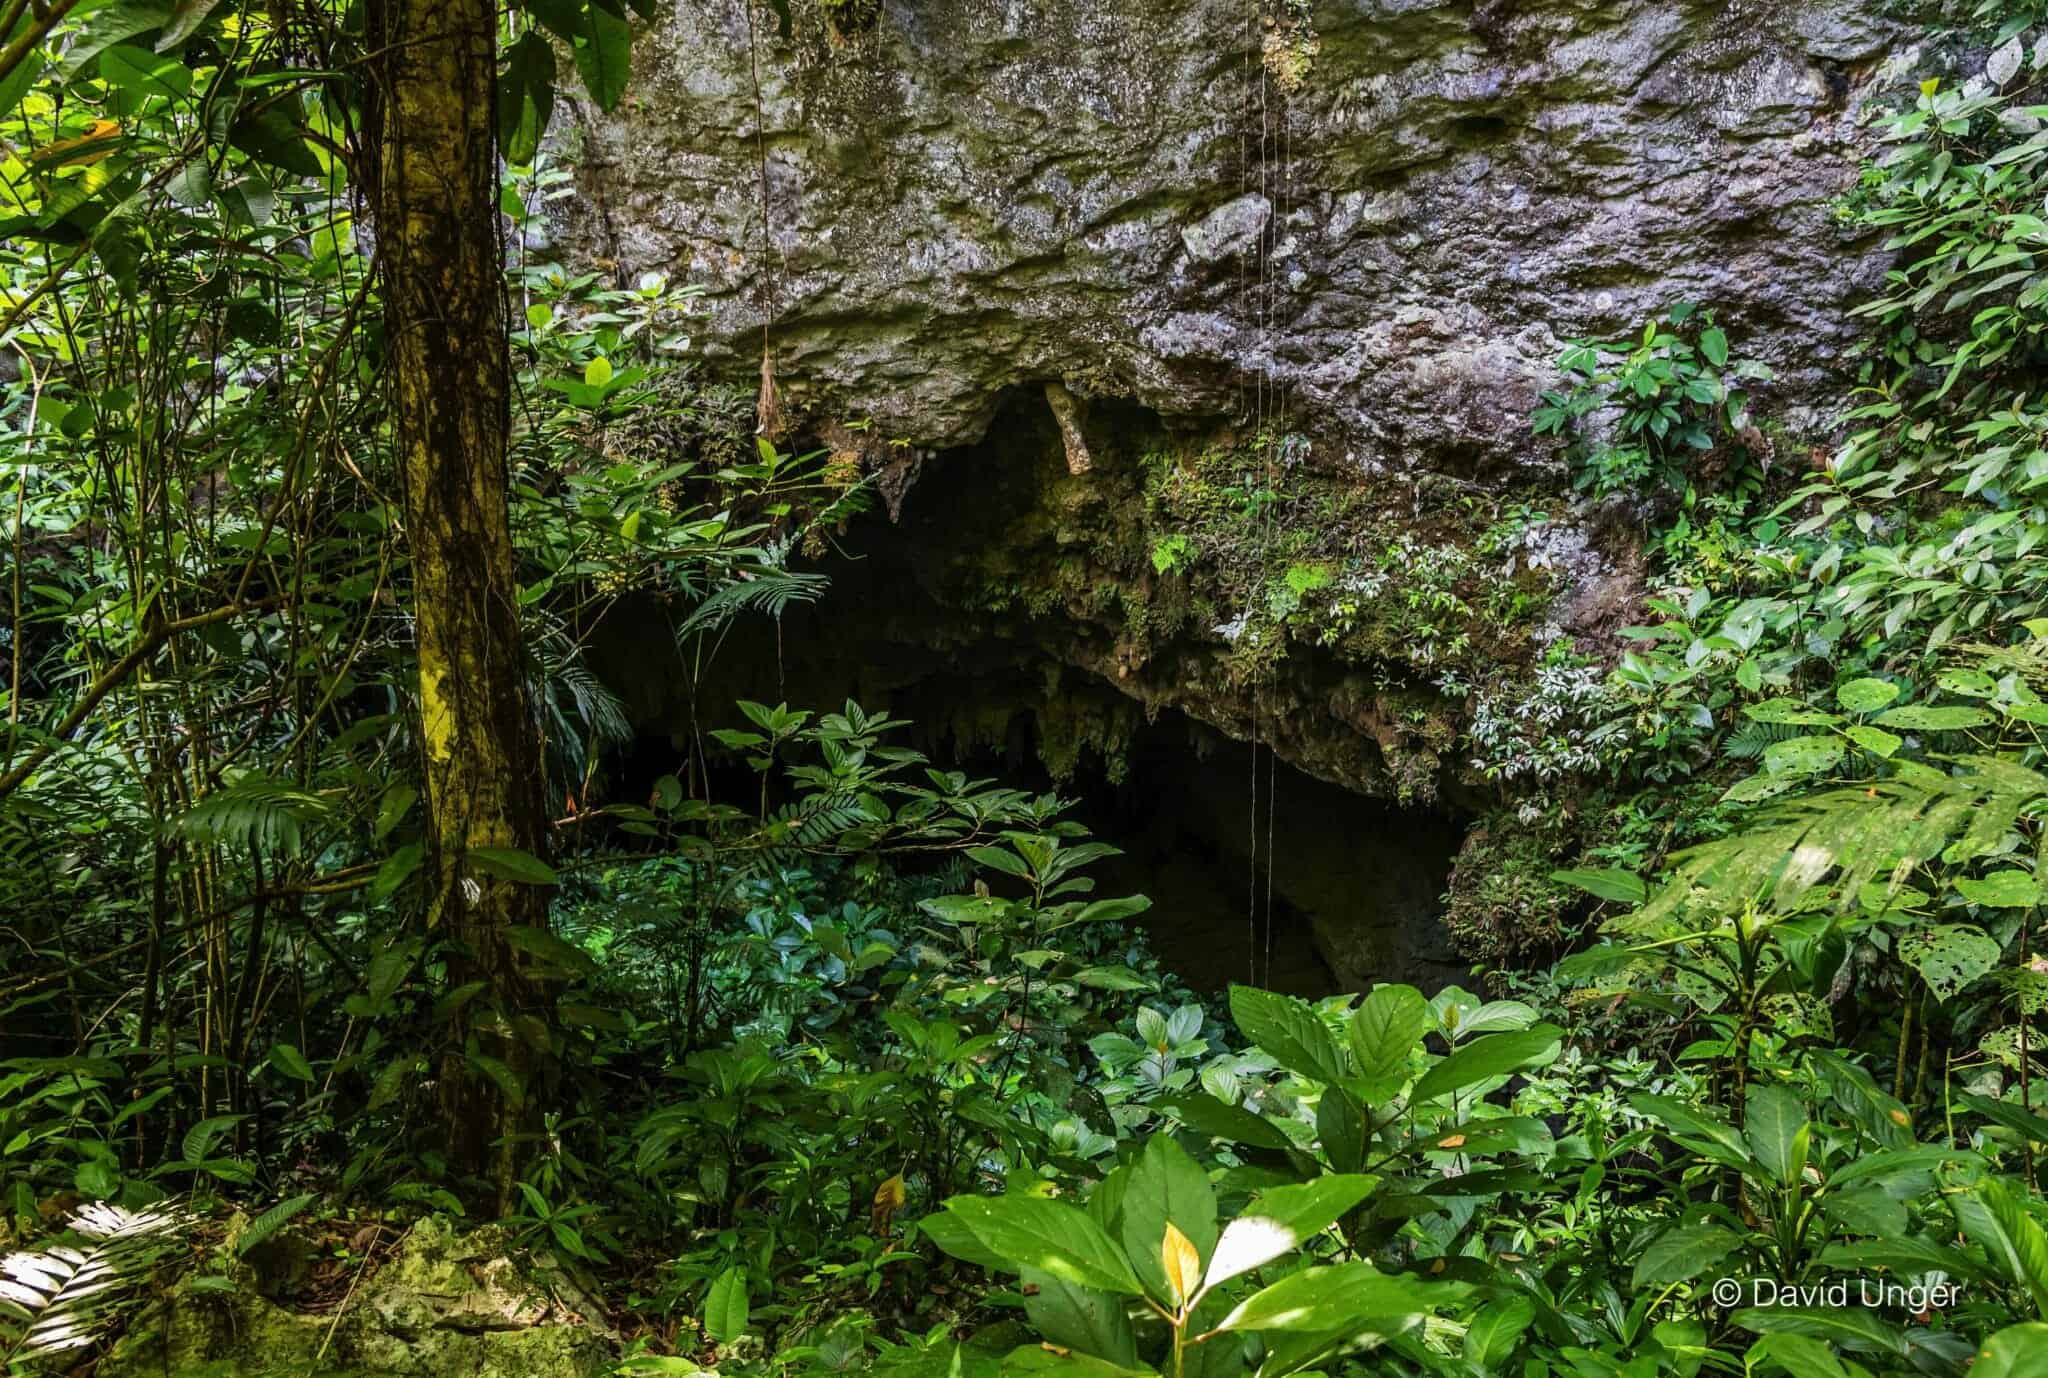 Entrance to St Herman's Cave seen through the jungle